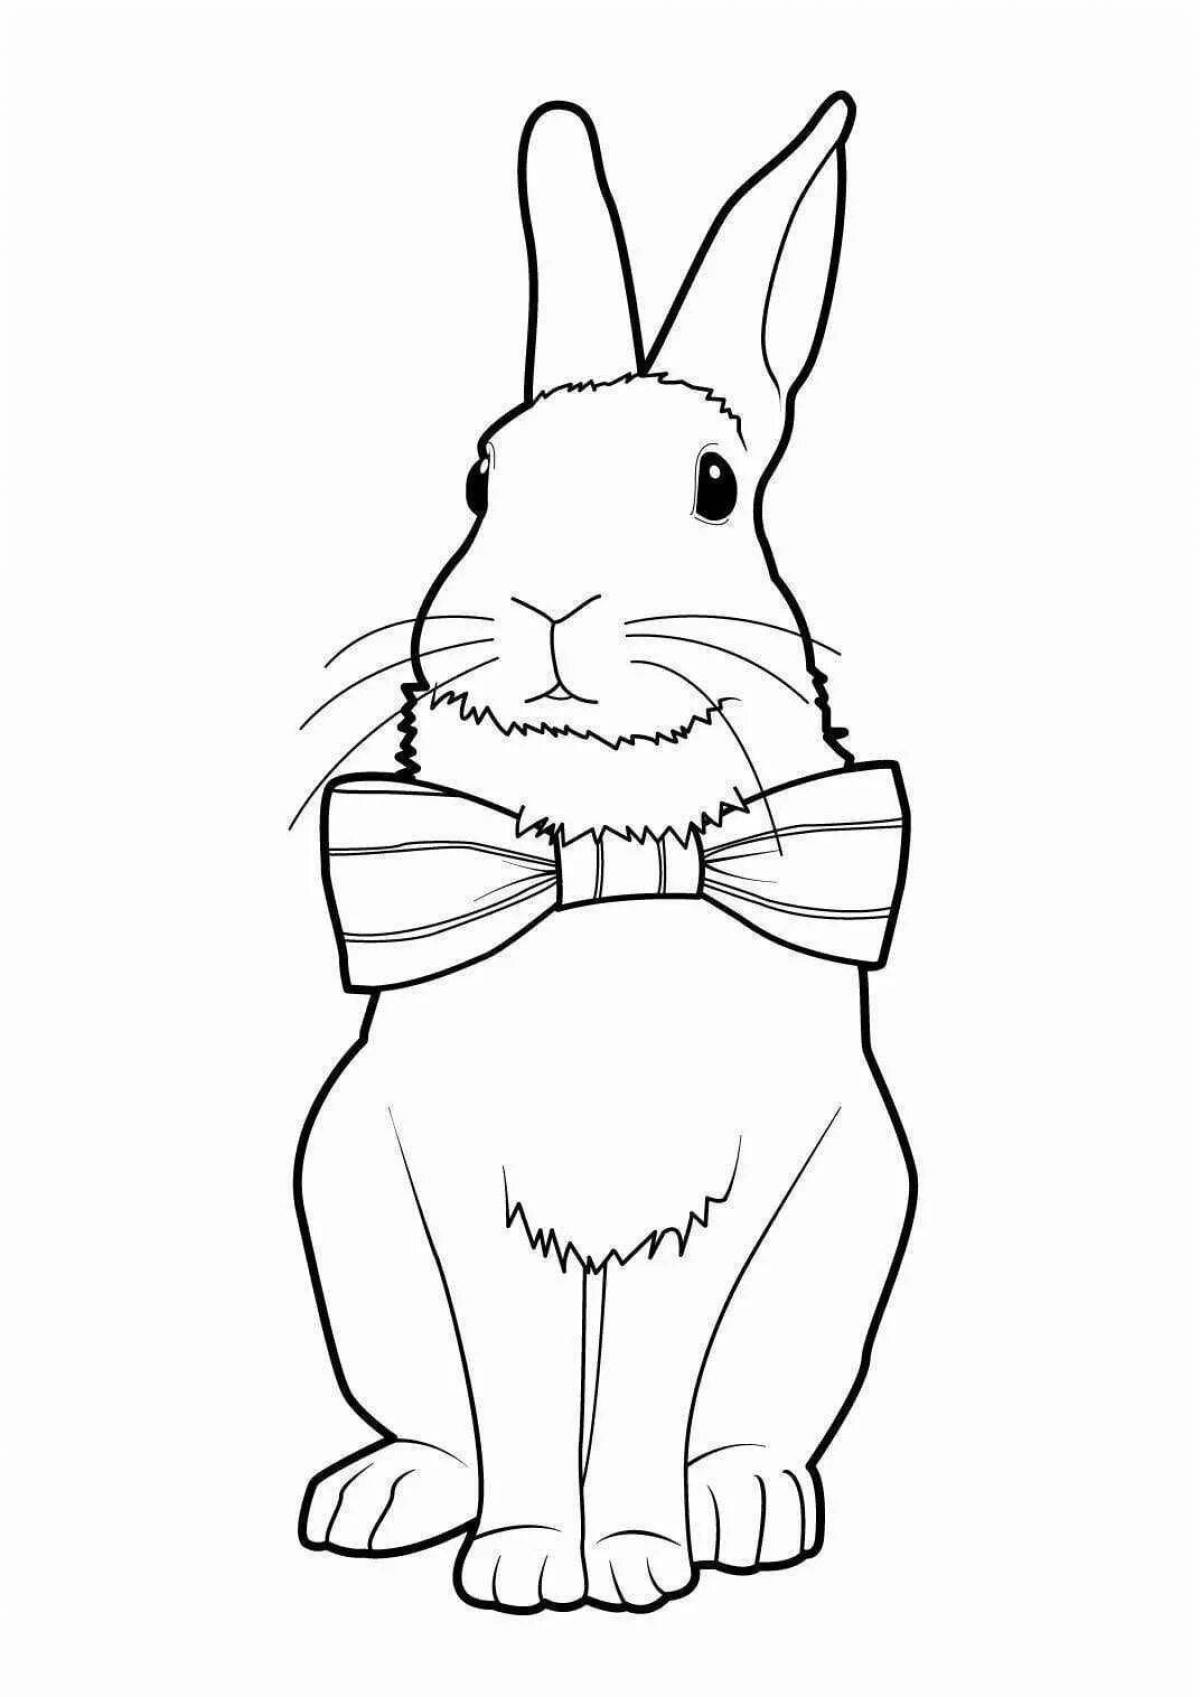 Animated coloring rabbit image